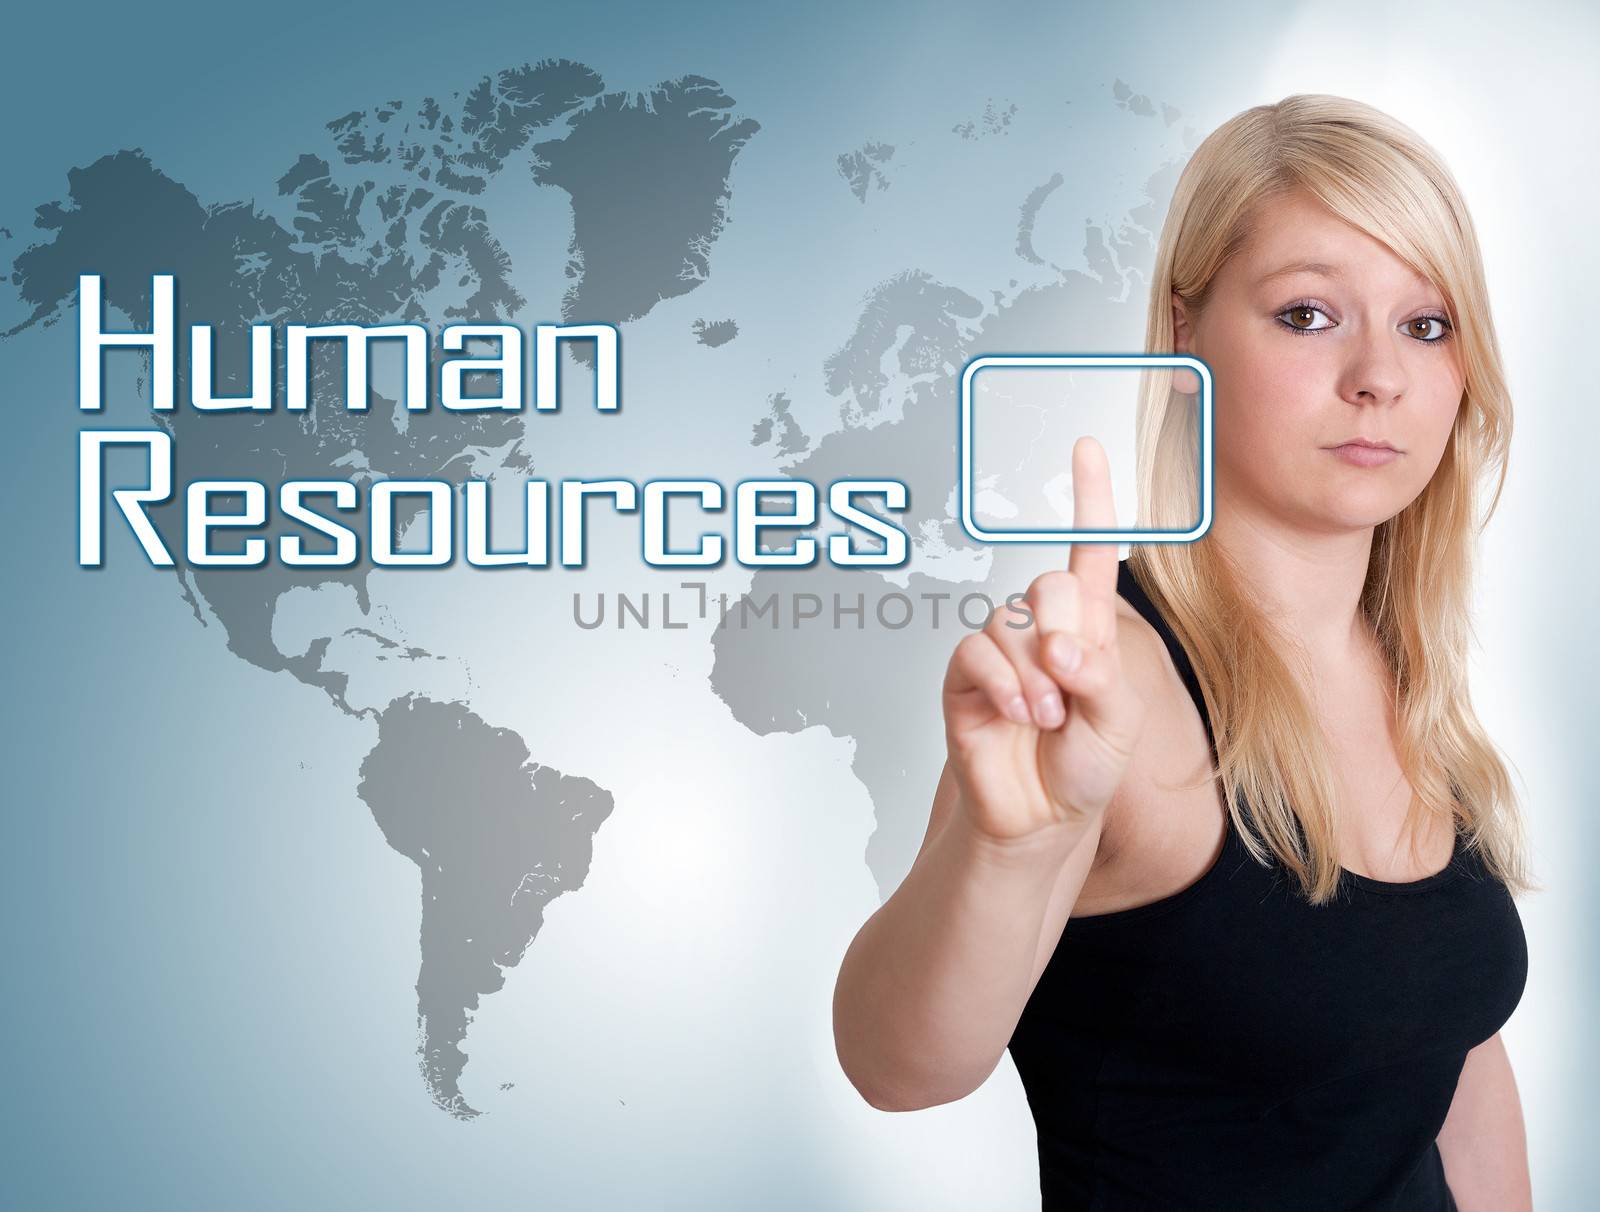 Young woman press digital Human Resources button on interface in front of her